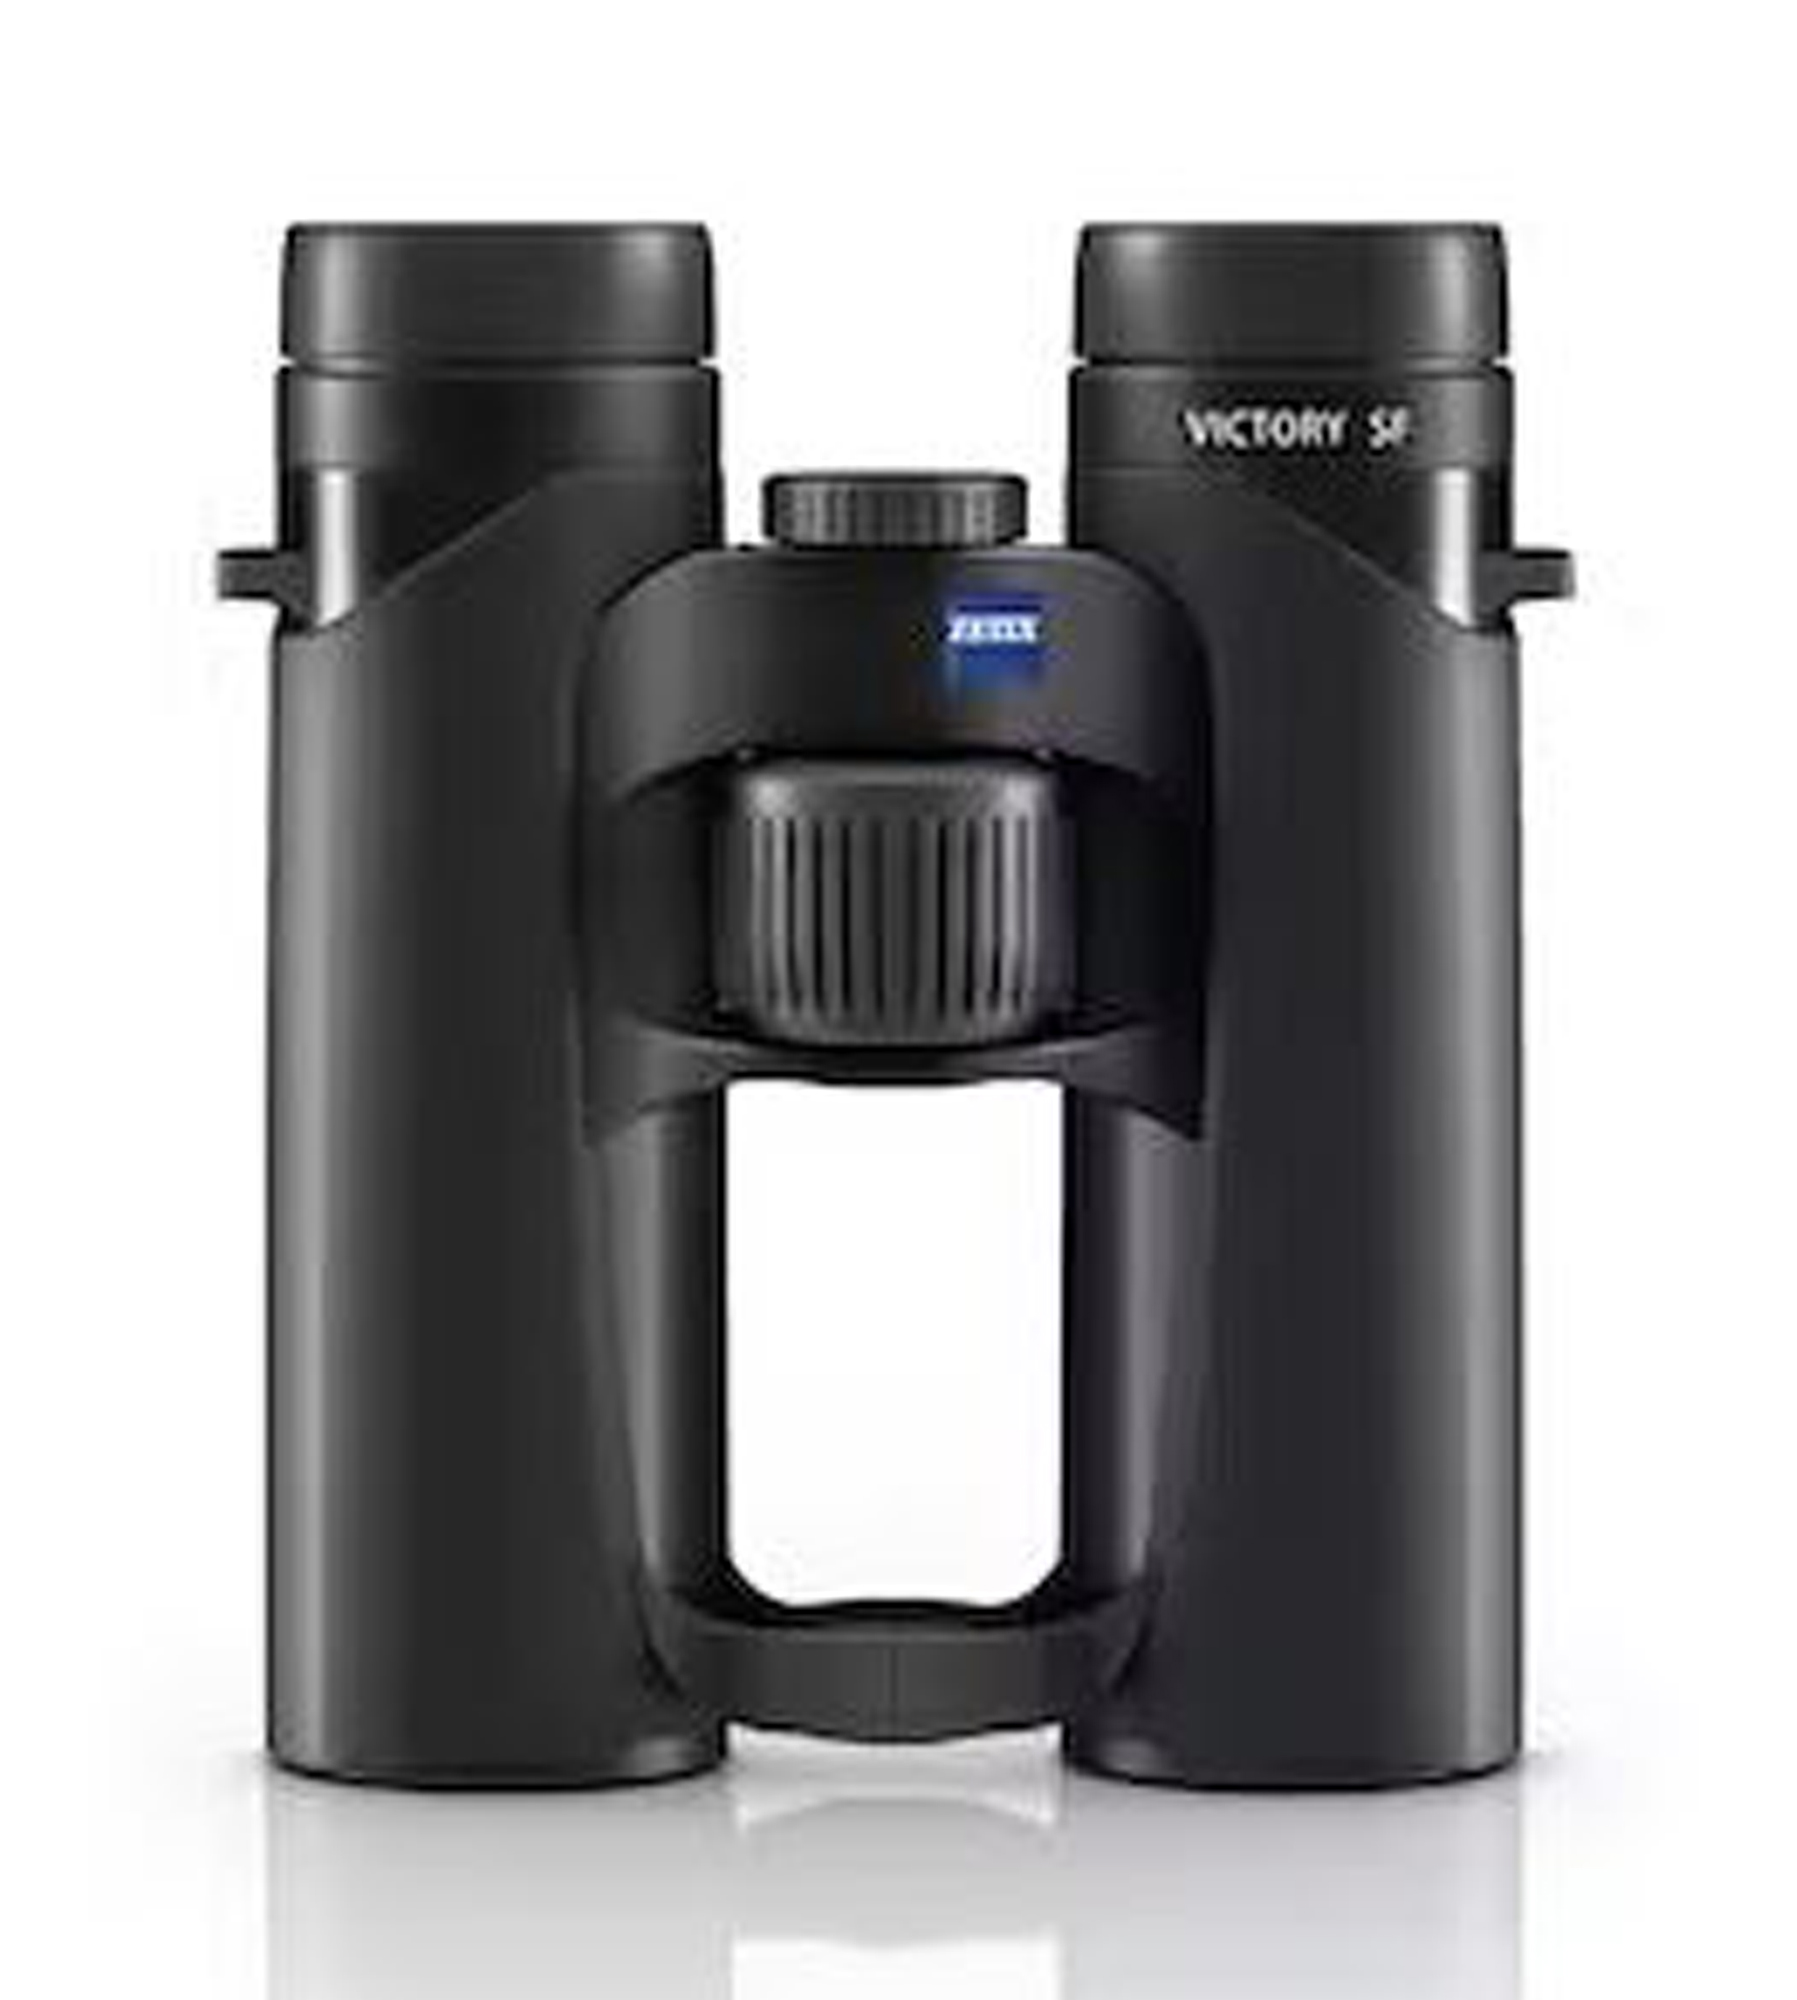 ZEISS VICTORY SF 8X32